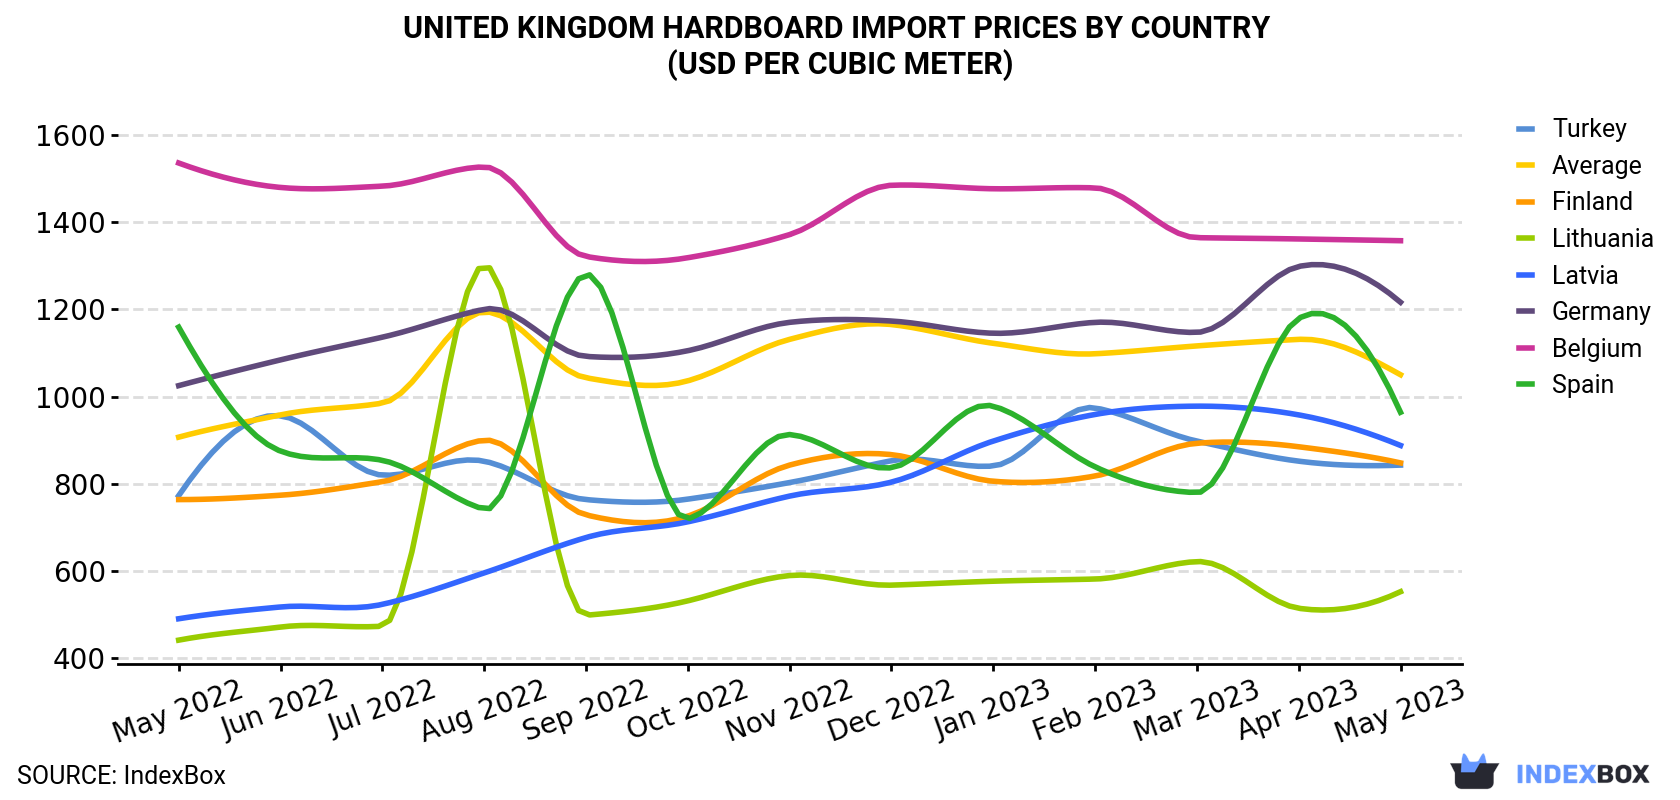 United Kingdom Hardboard Import Prices By Country (USD Per Cubic Meter)